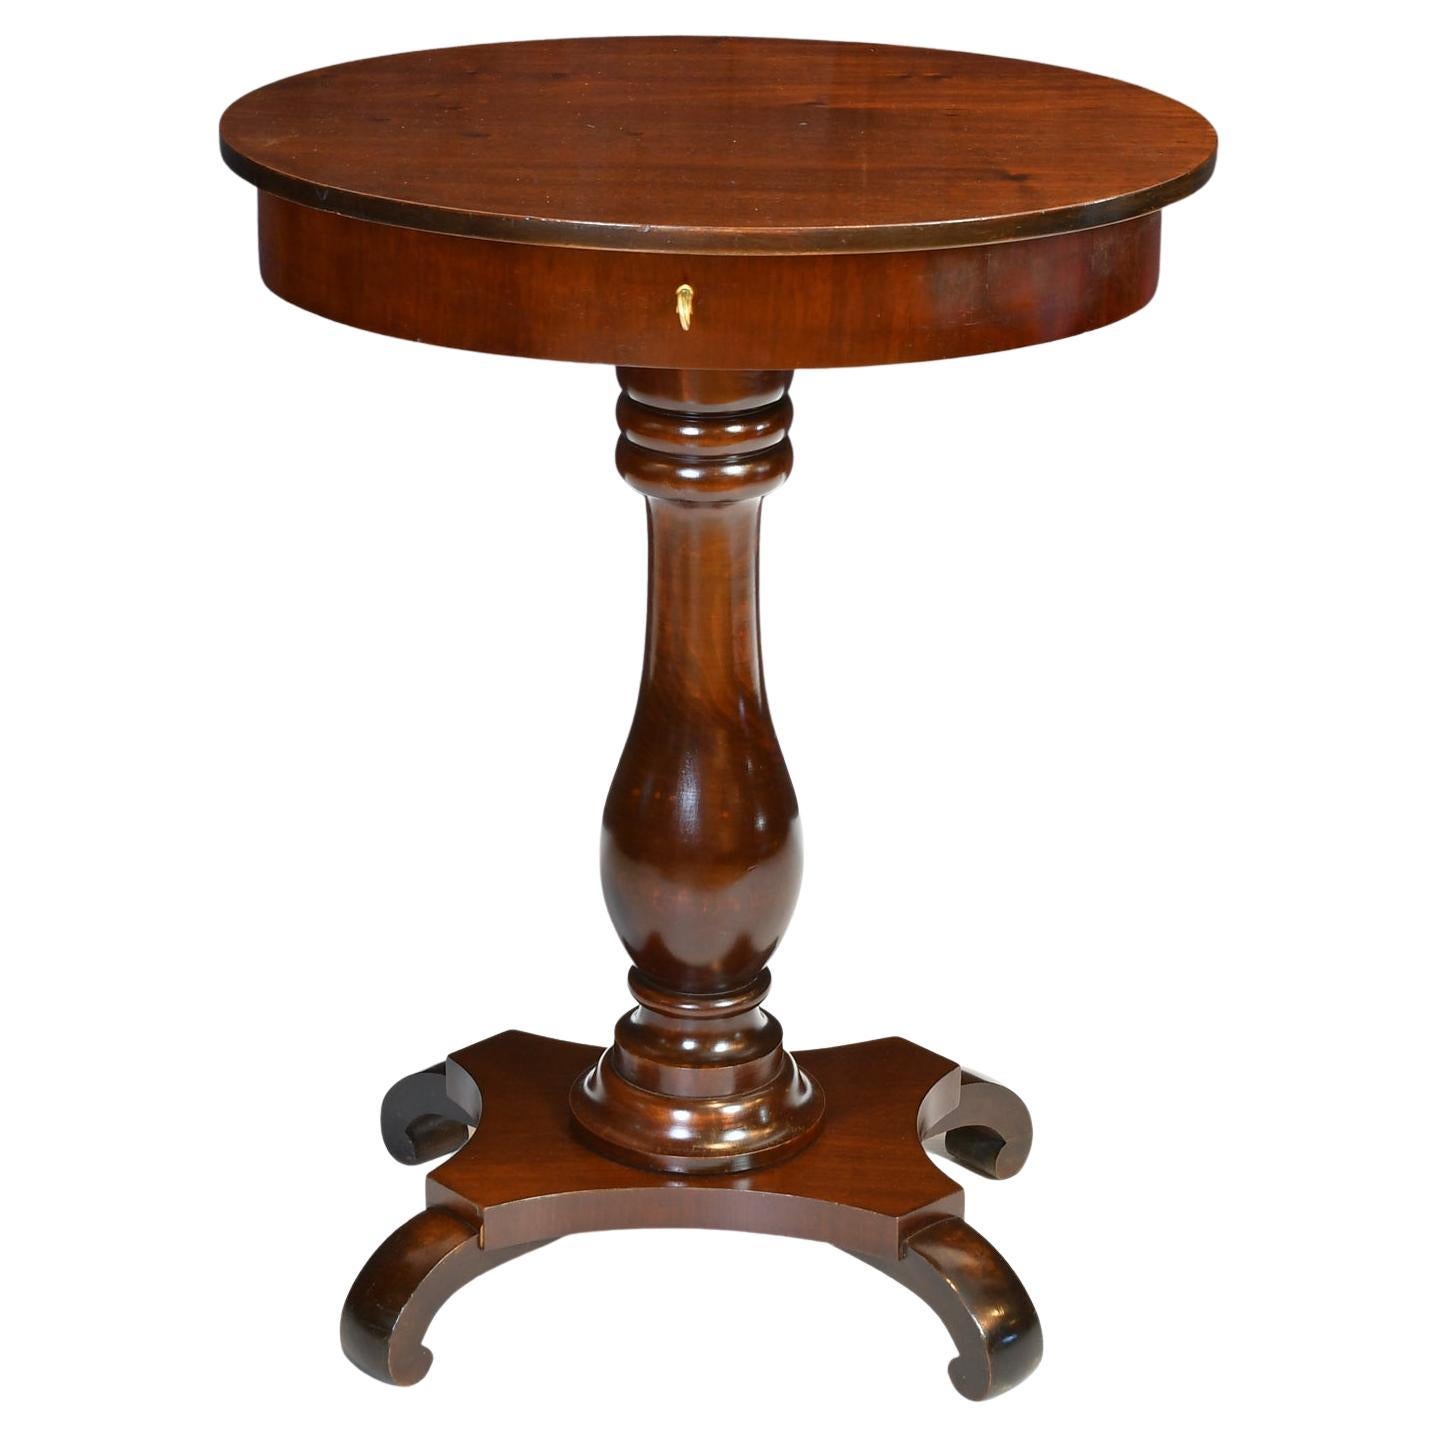 Small Antique Oval Pedestal Table or Work Table in Dark-Stained Mahogany